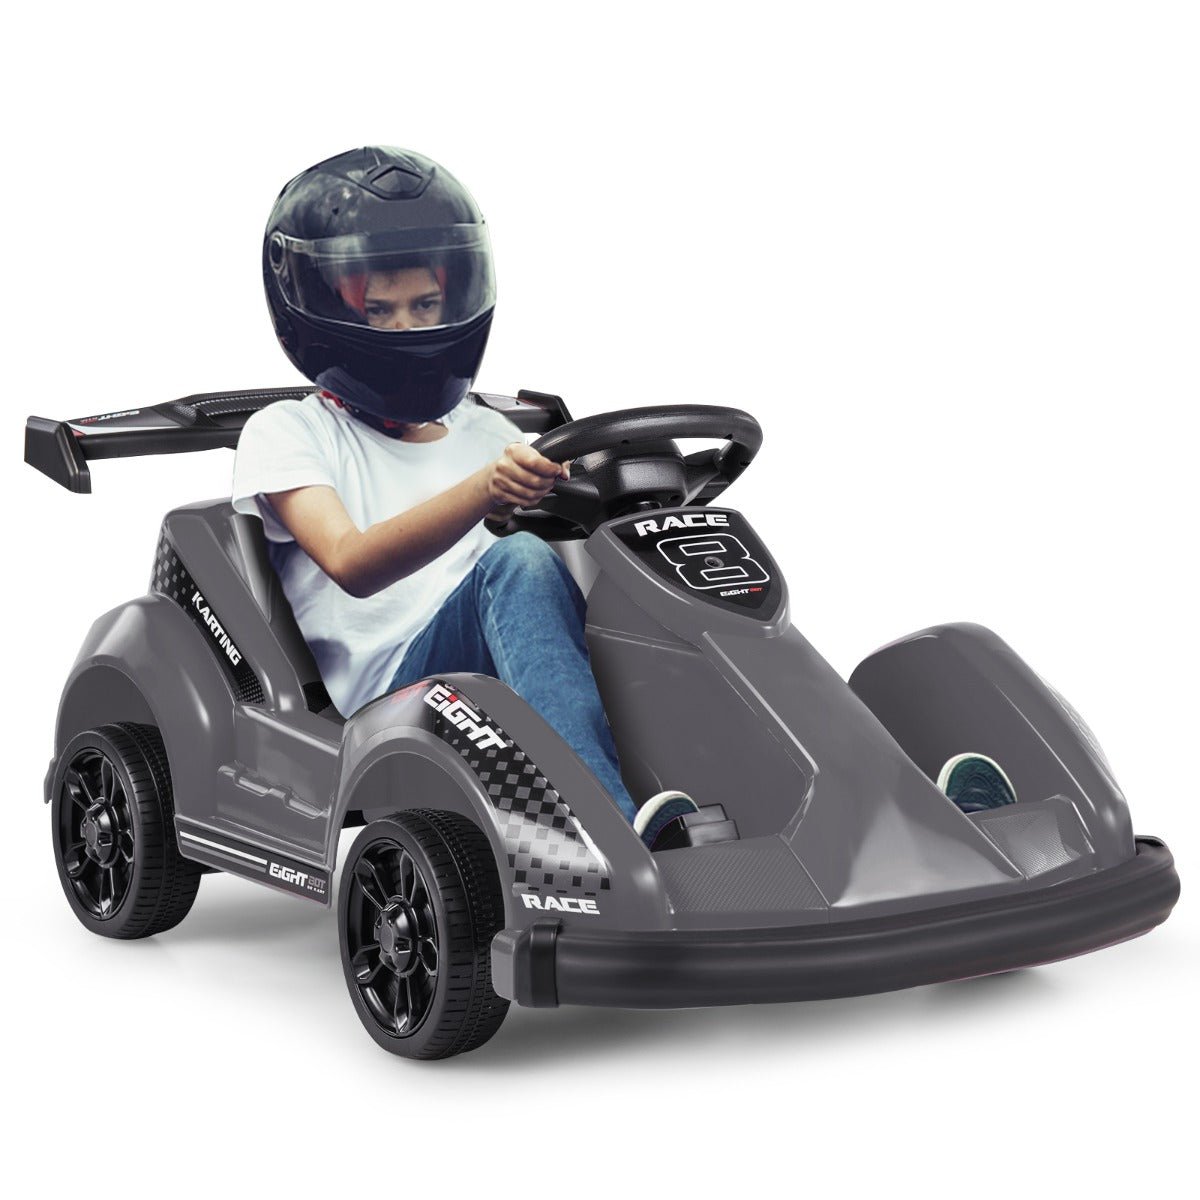 Black Electric Go Kart with Remote Control: Ignite Your Child's Adventure